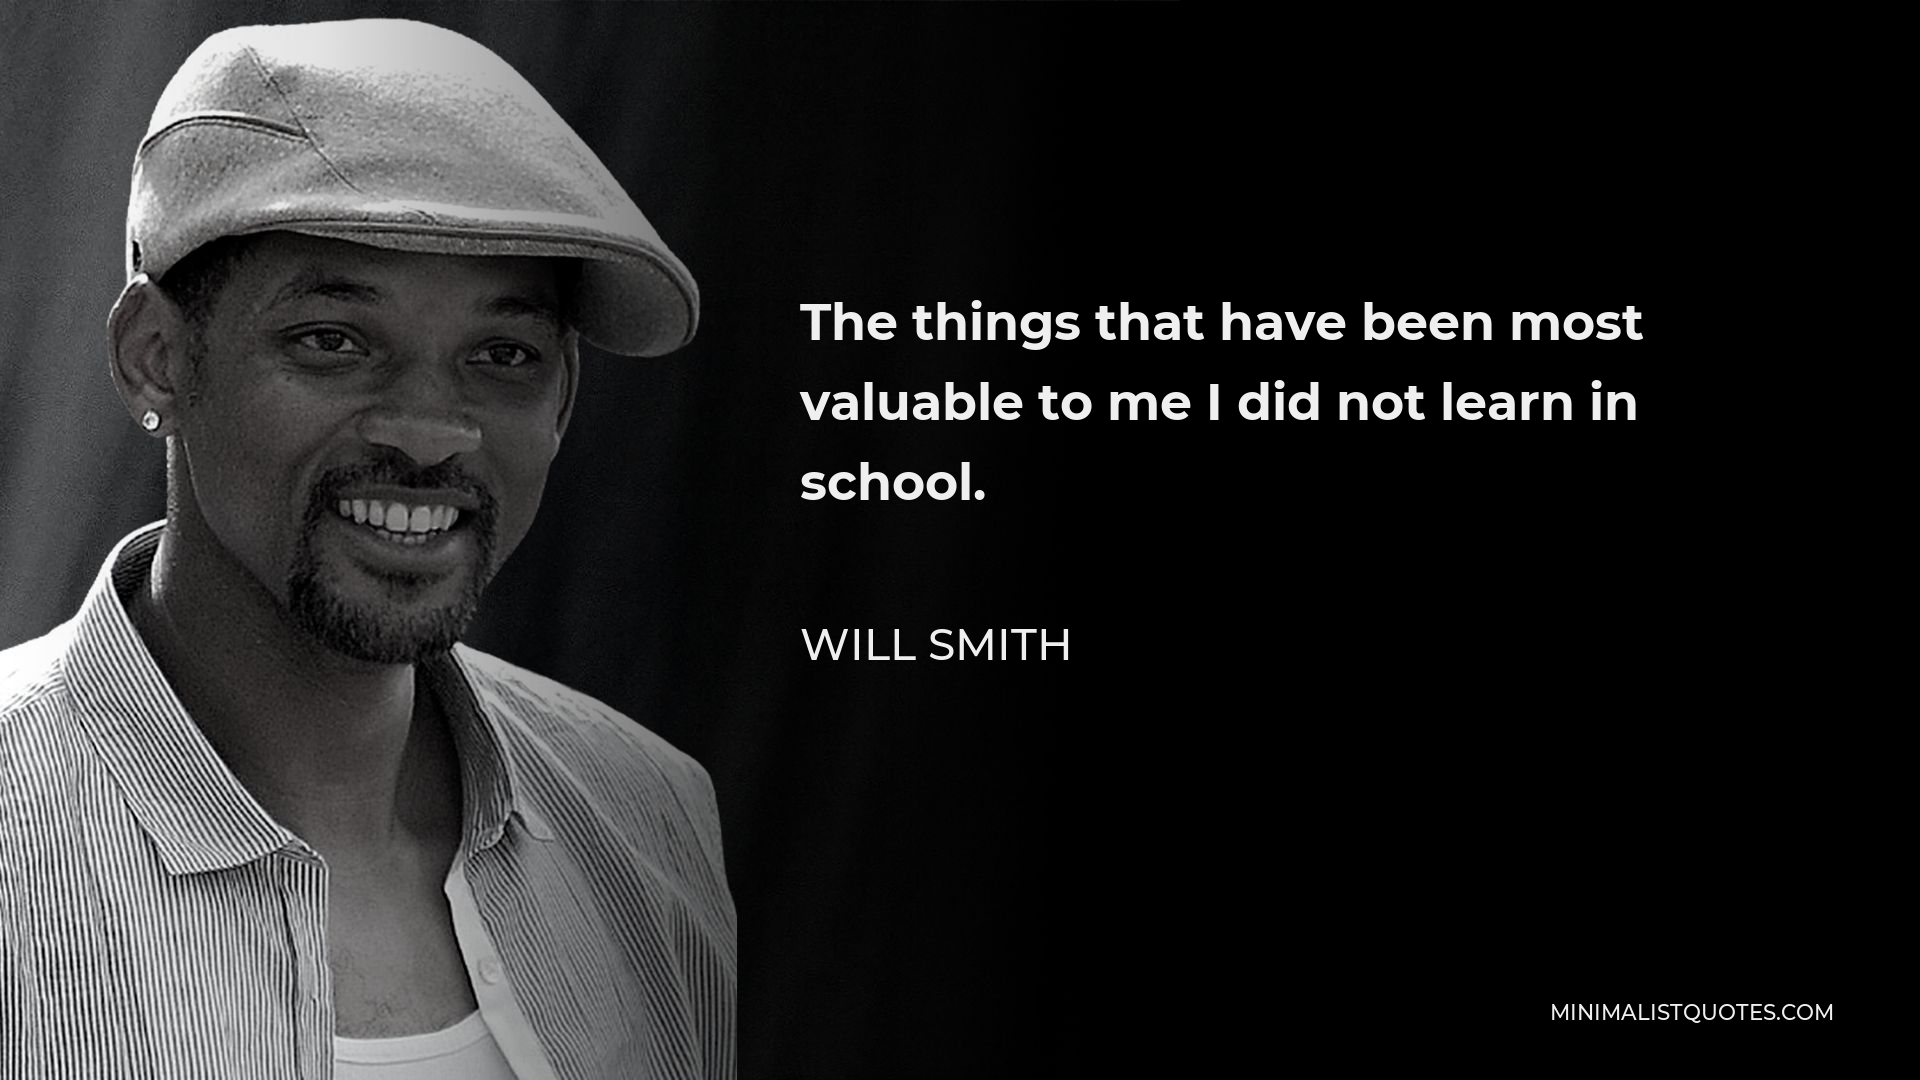 Will Smith Quote - The things that have been most valuable to me I did not learn in school.